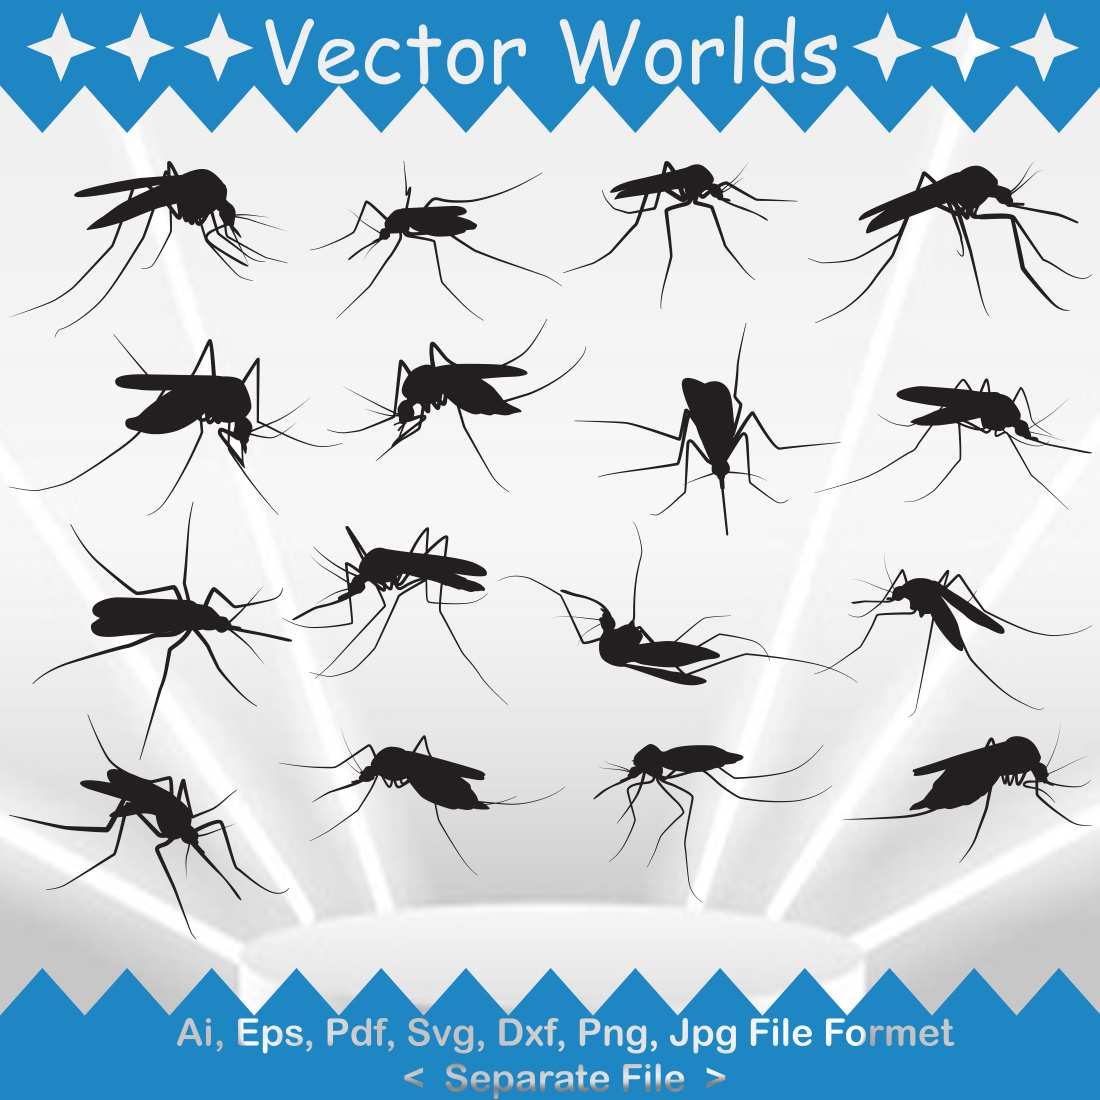 Group of mosquito silhouettes on a blue and white background.